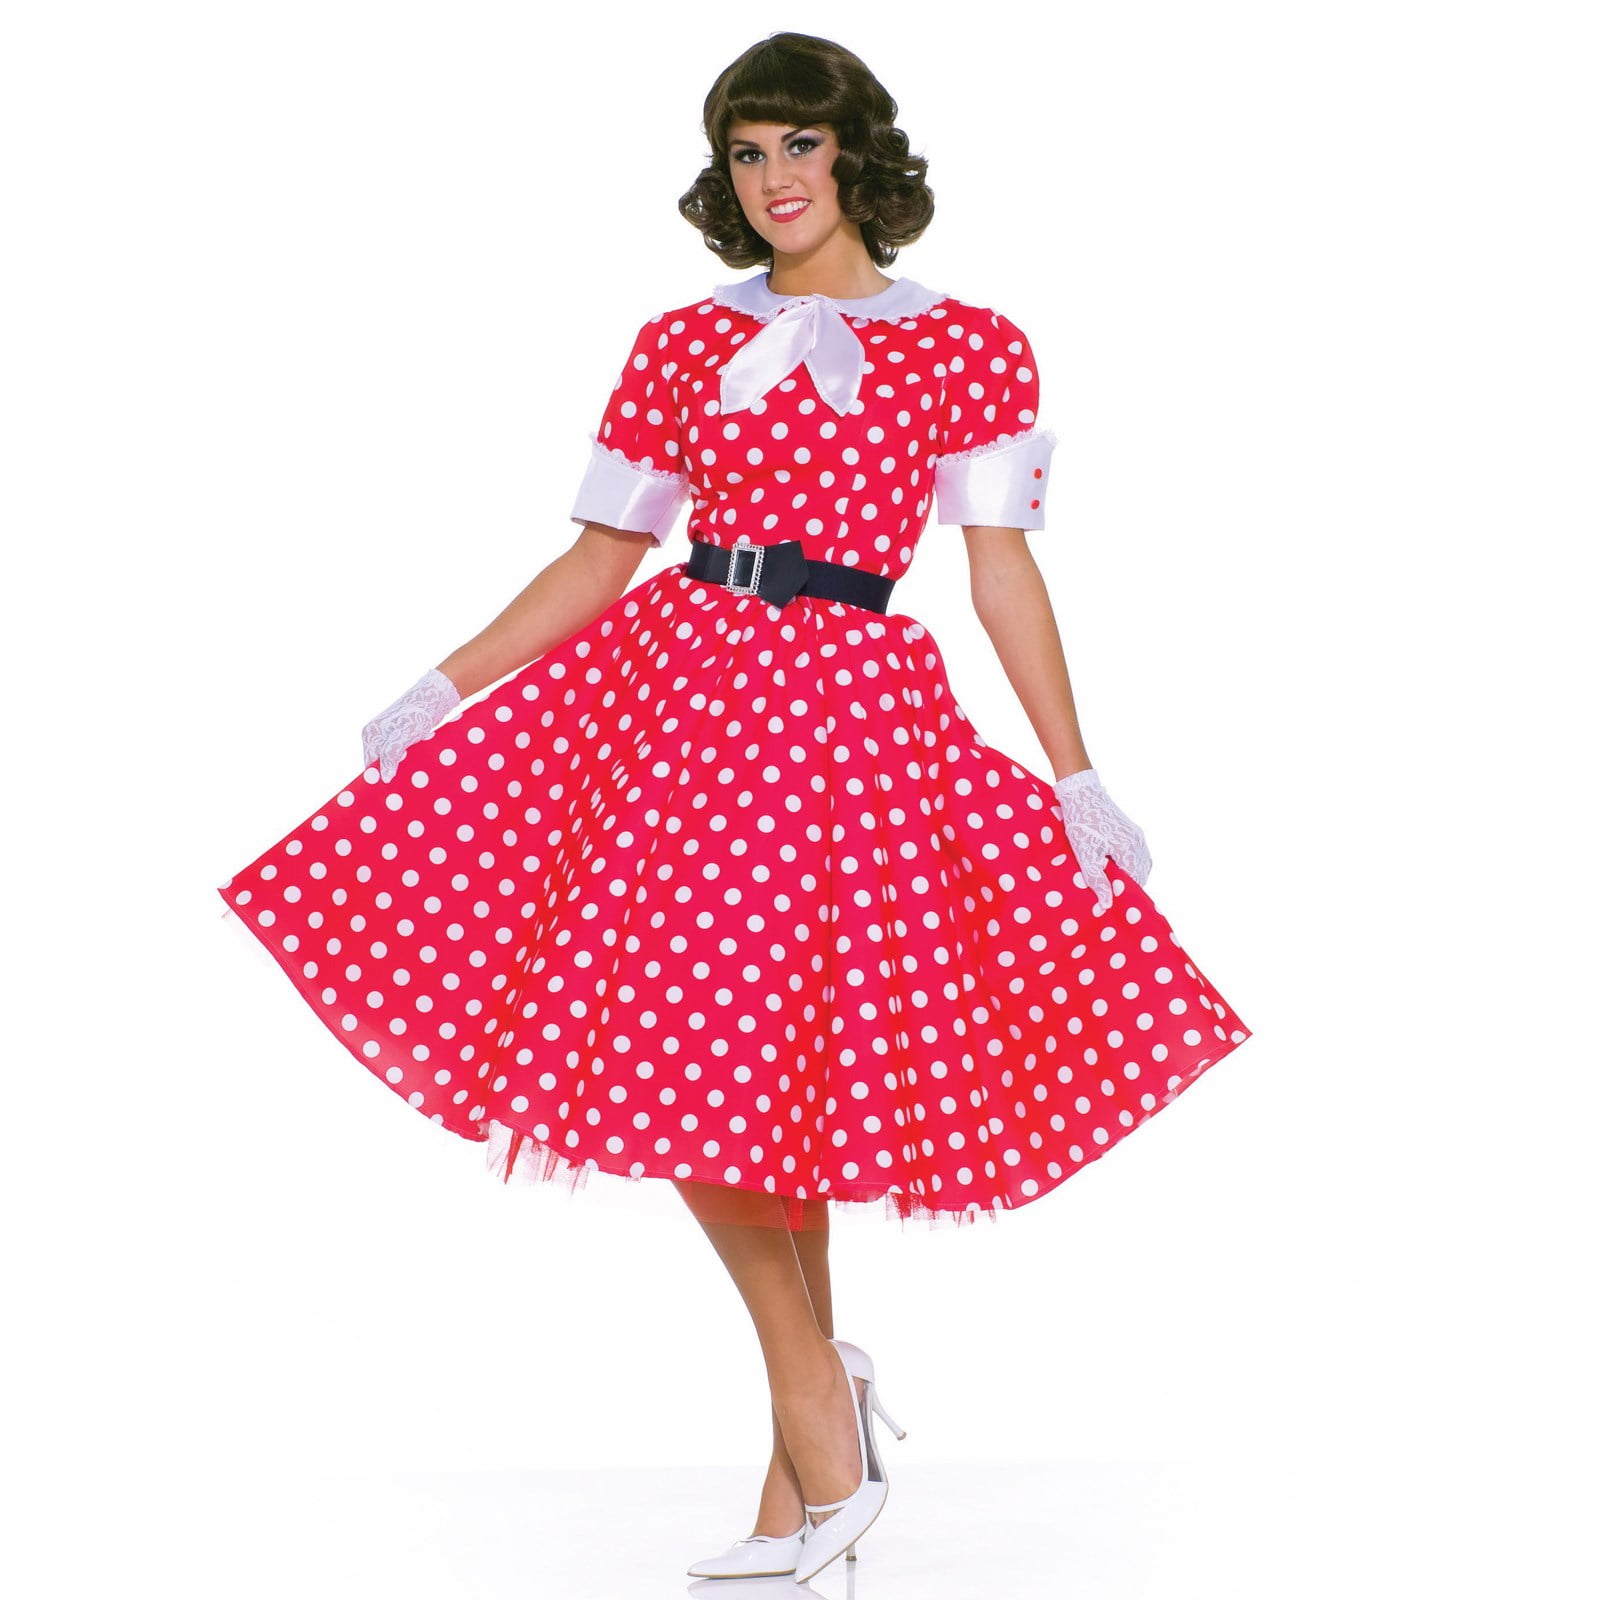 sexy 50s housewife costumes Fucking Pics Hq